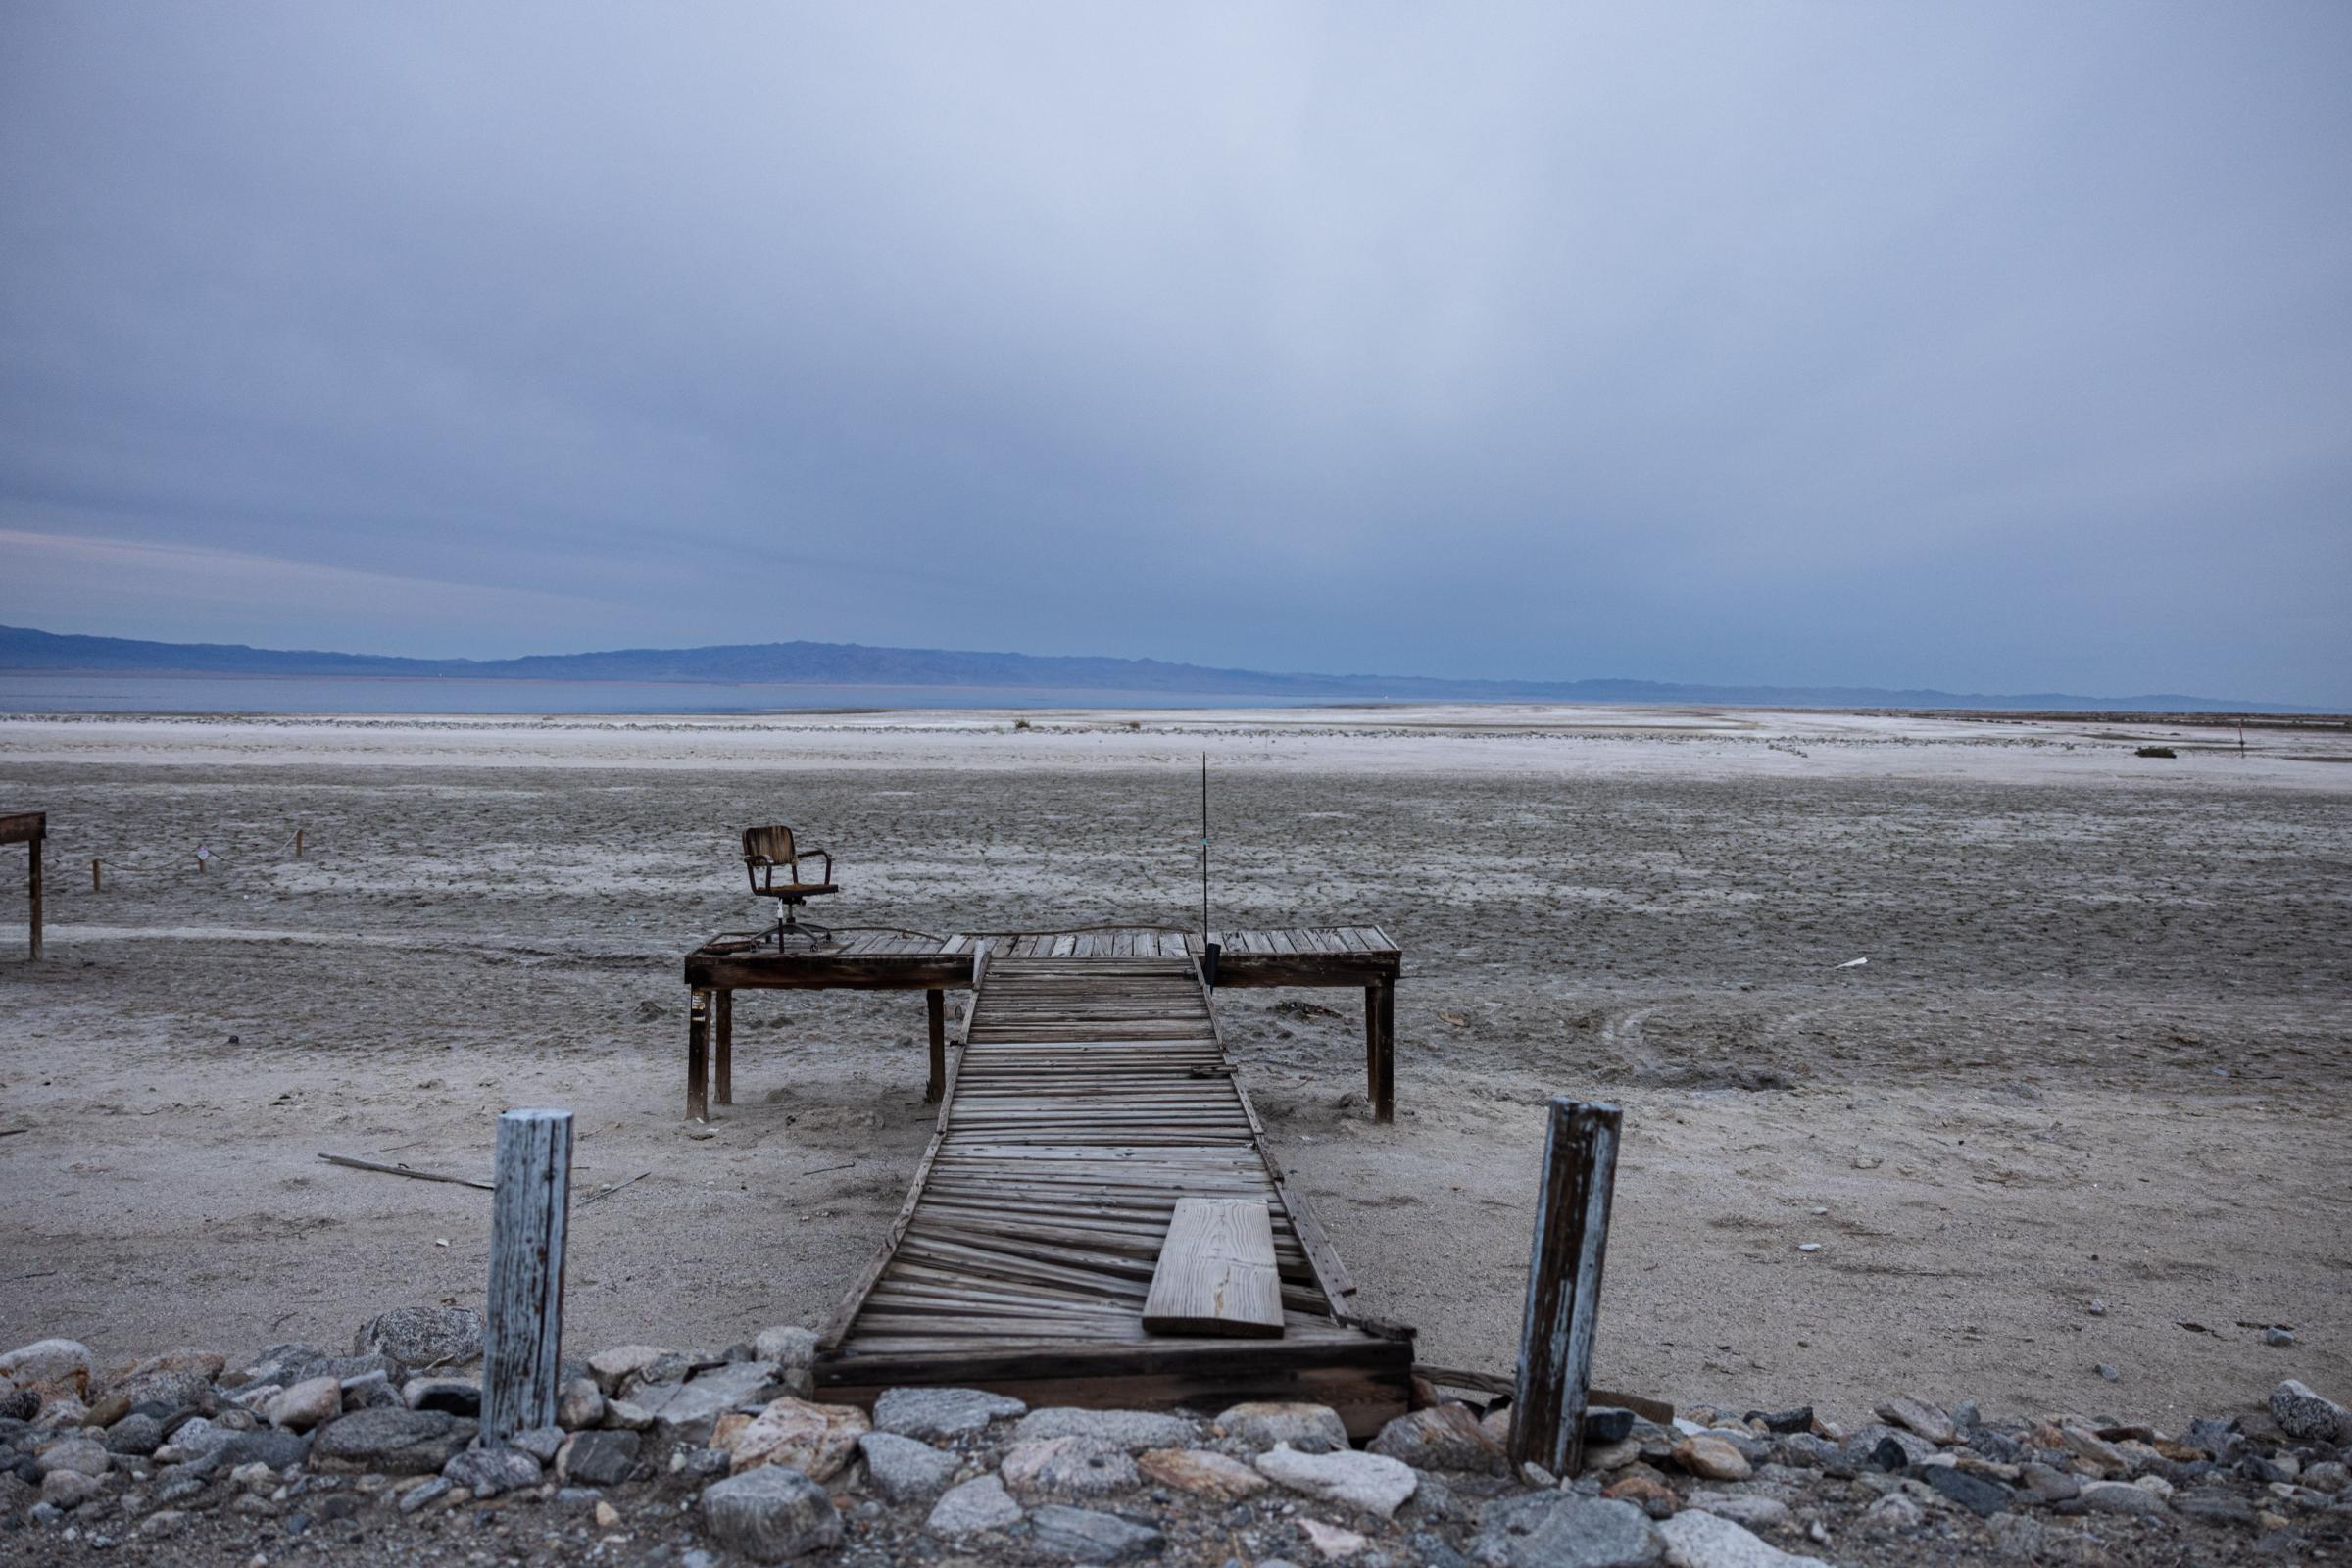  - The Salton Sea faces a crisis  - A dock on a property on Oahu Lane sits reaching out into...